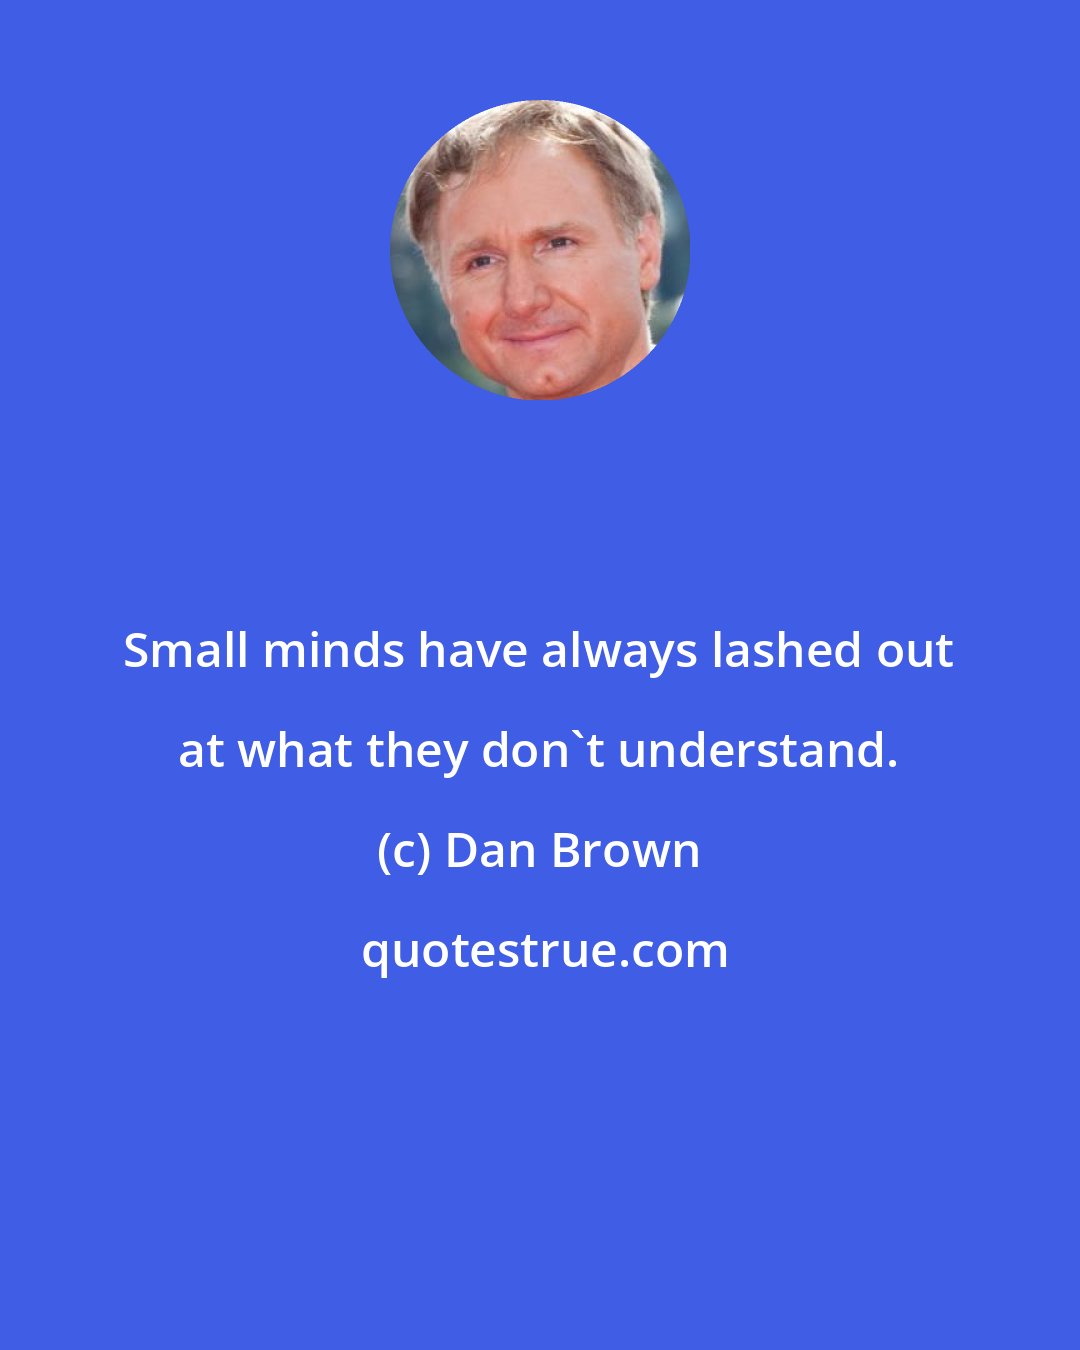 Dan Brown: Small minds have always lashed out at what they don't understand.